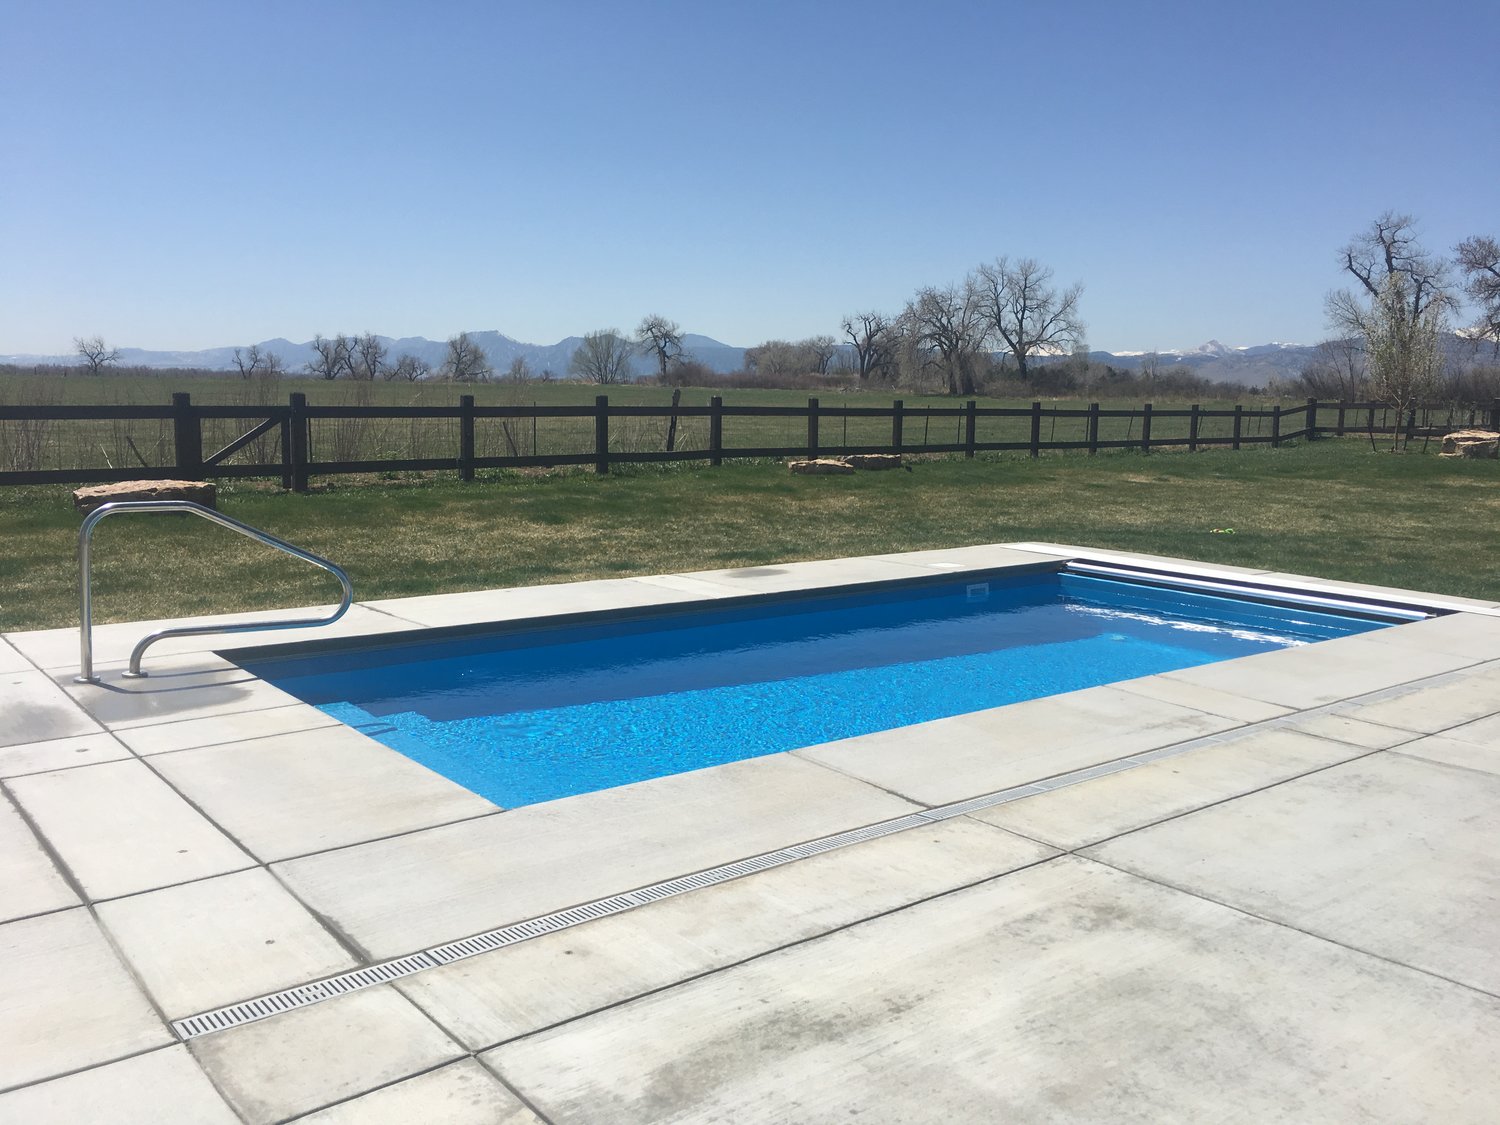 Pool Companies Near Me Suggest These Amenities for Pool Fun in the  Jefferson Valley, NY Area — Albert Group Landscaping & Swimming Pools